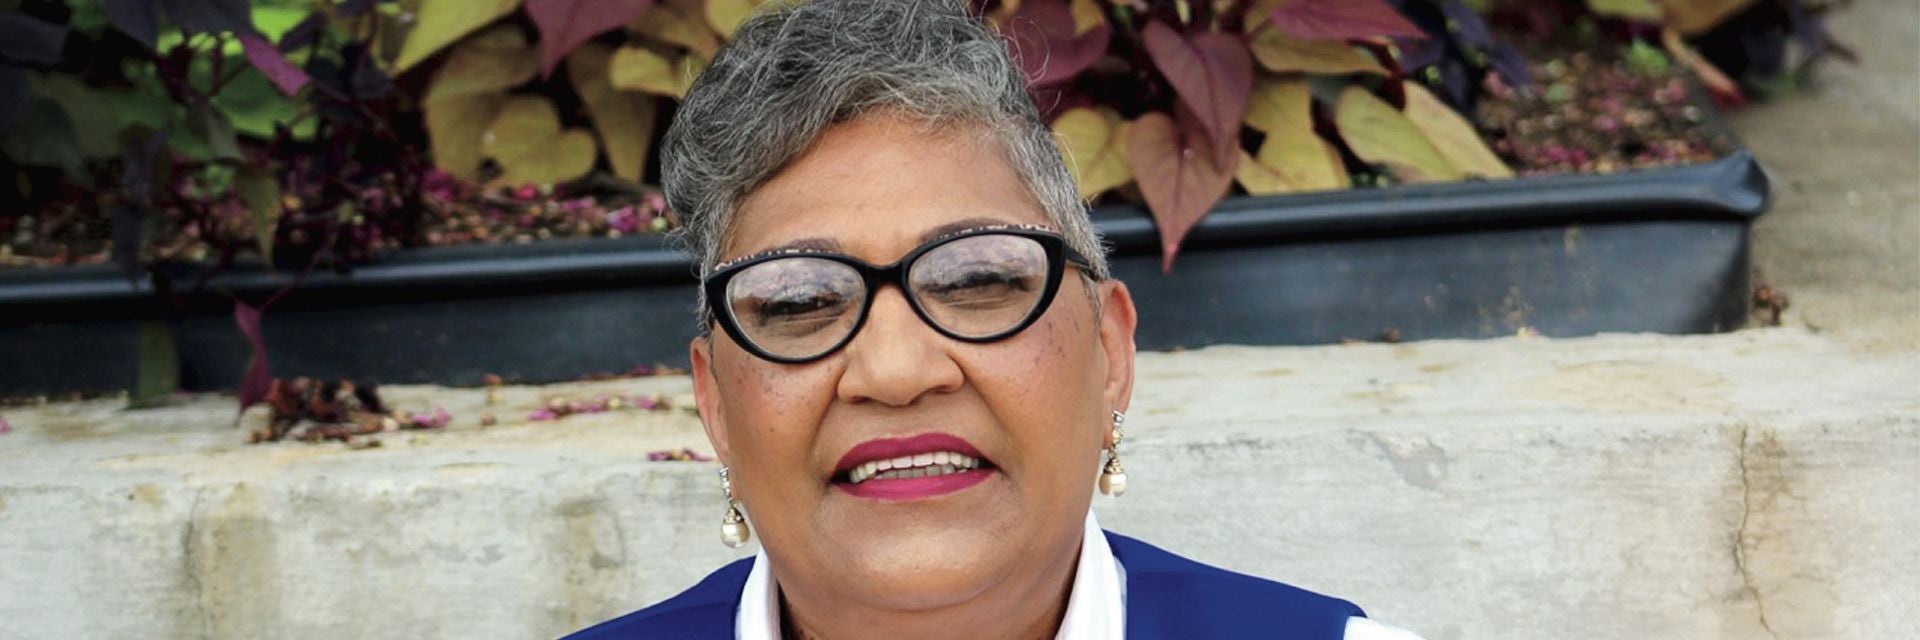 How Reverend Sharon Risher Found Forgiveness After Losing Family In The Charleston Church Shooting